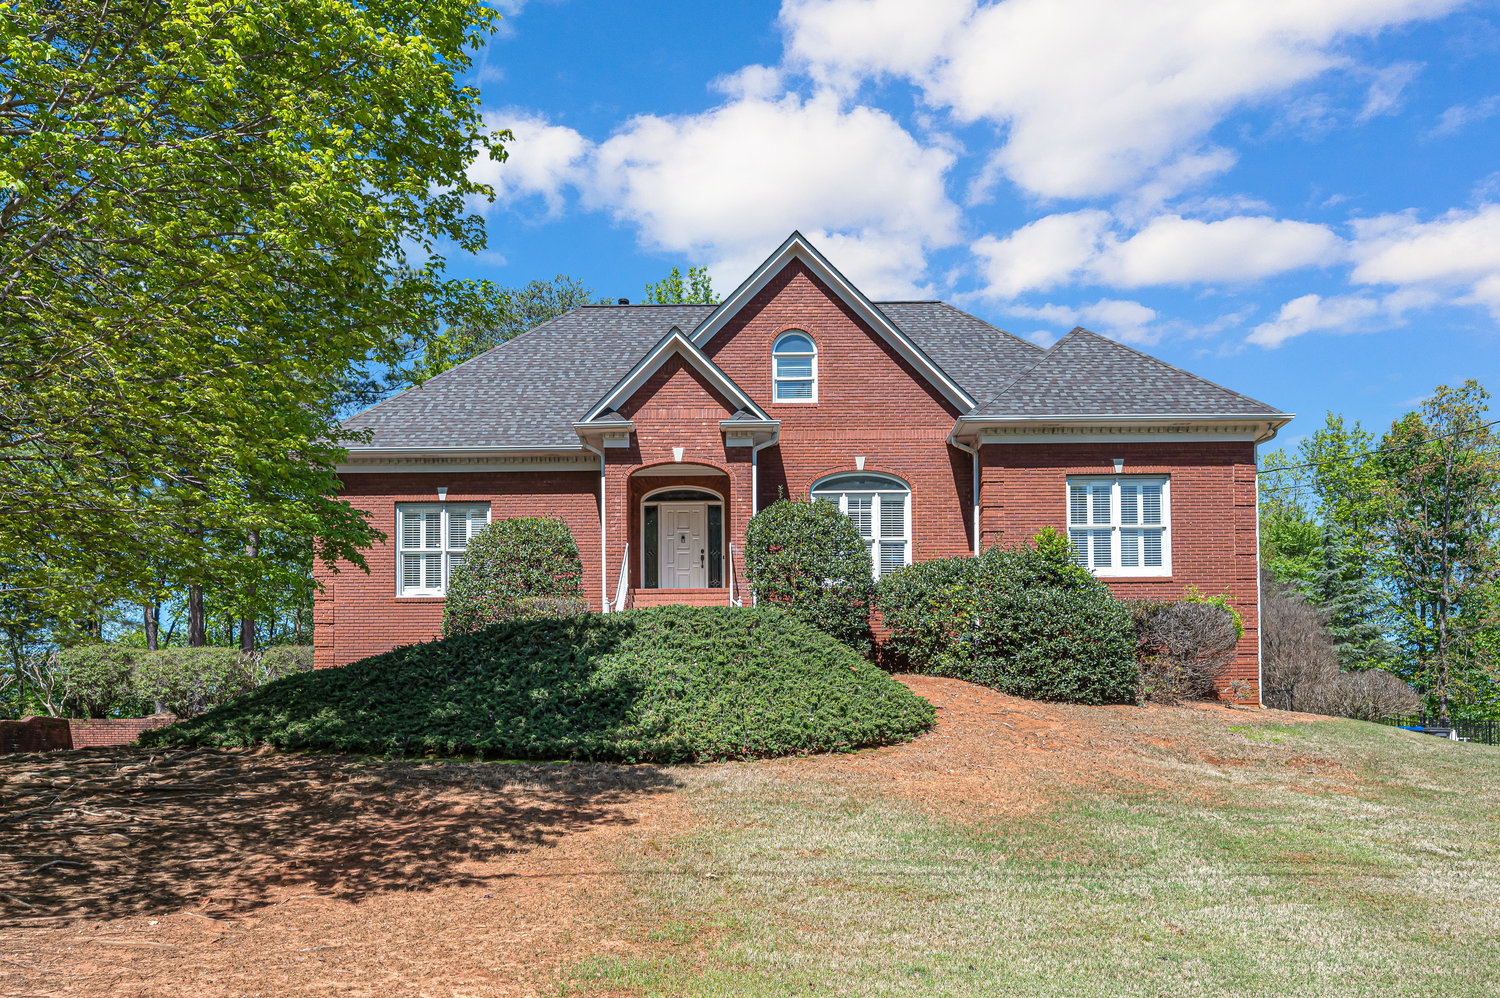 Virtual Tour of Birmingham Metro Real Estate Listing For Sale | 208 Wimberly Drive, Trussville, AL 35173